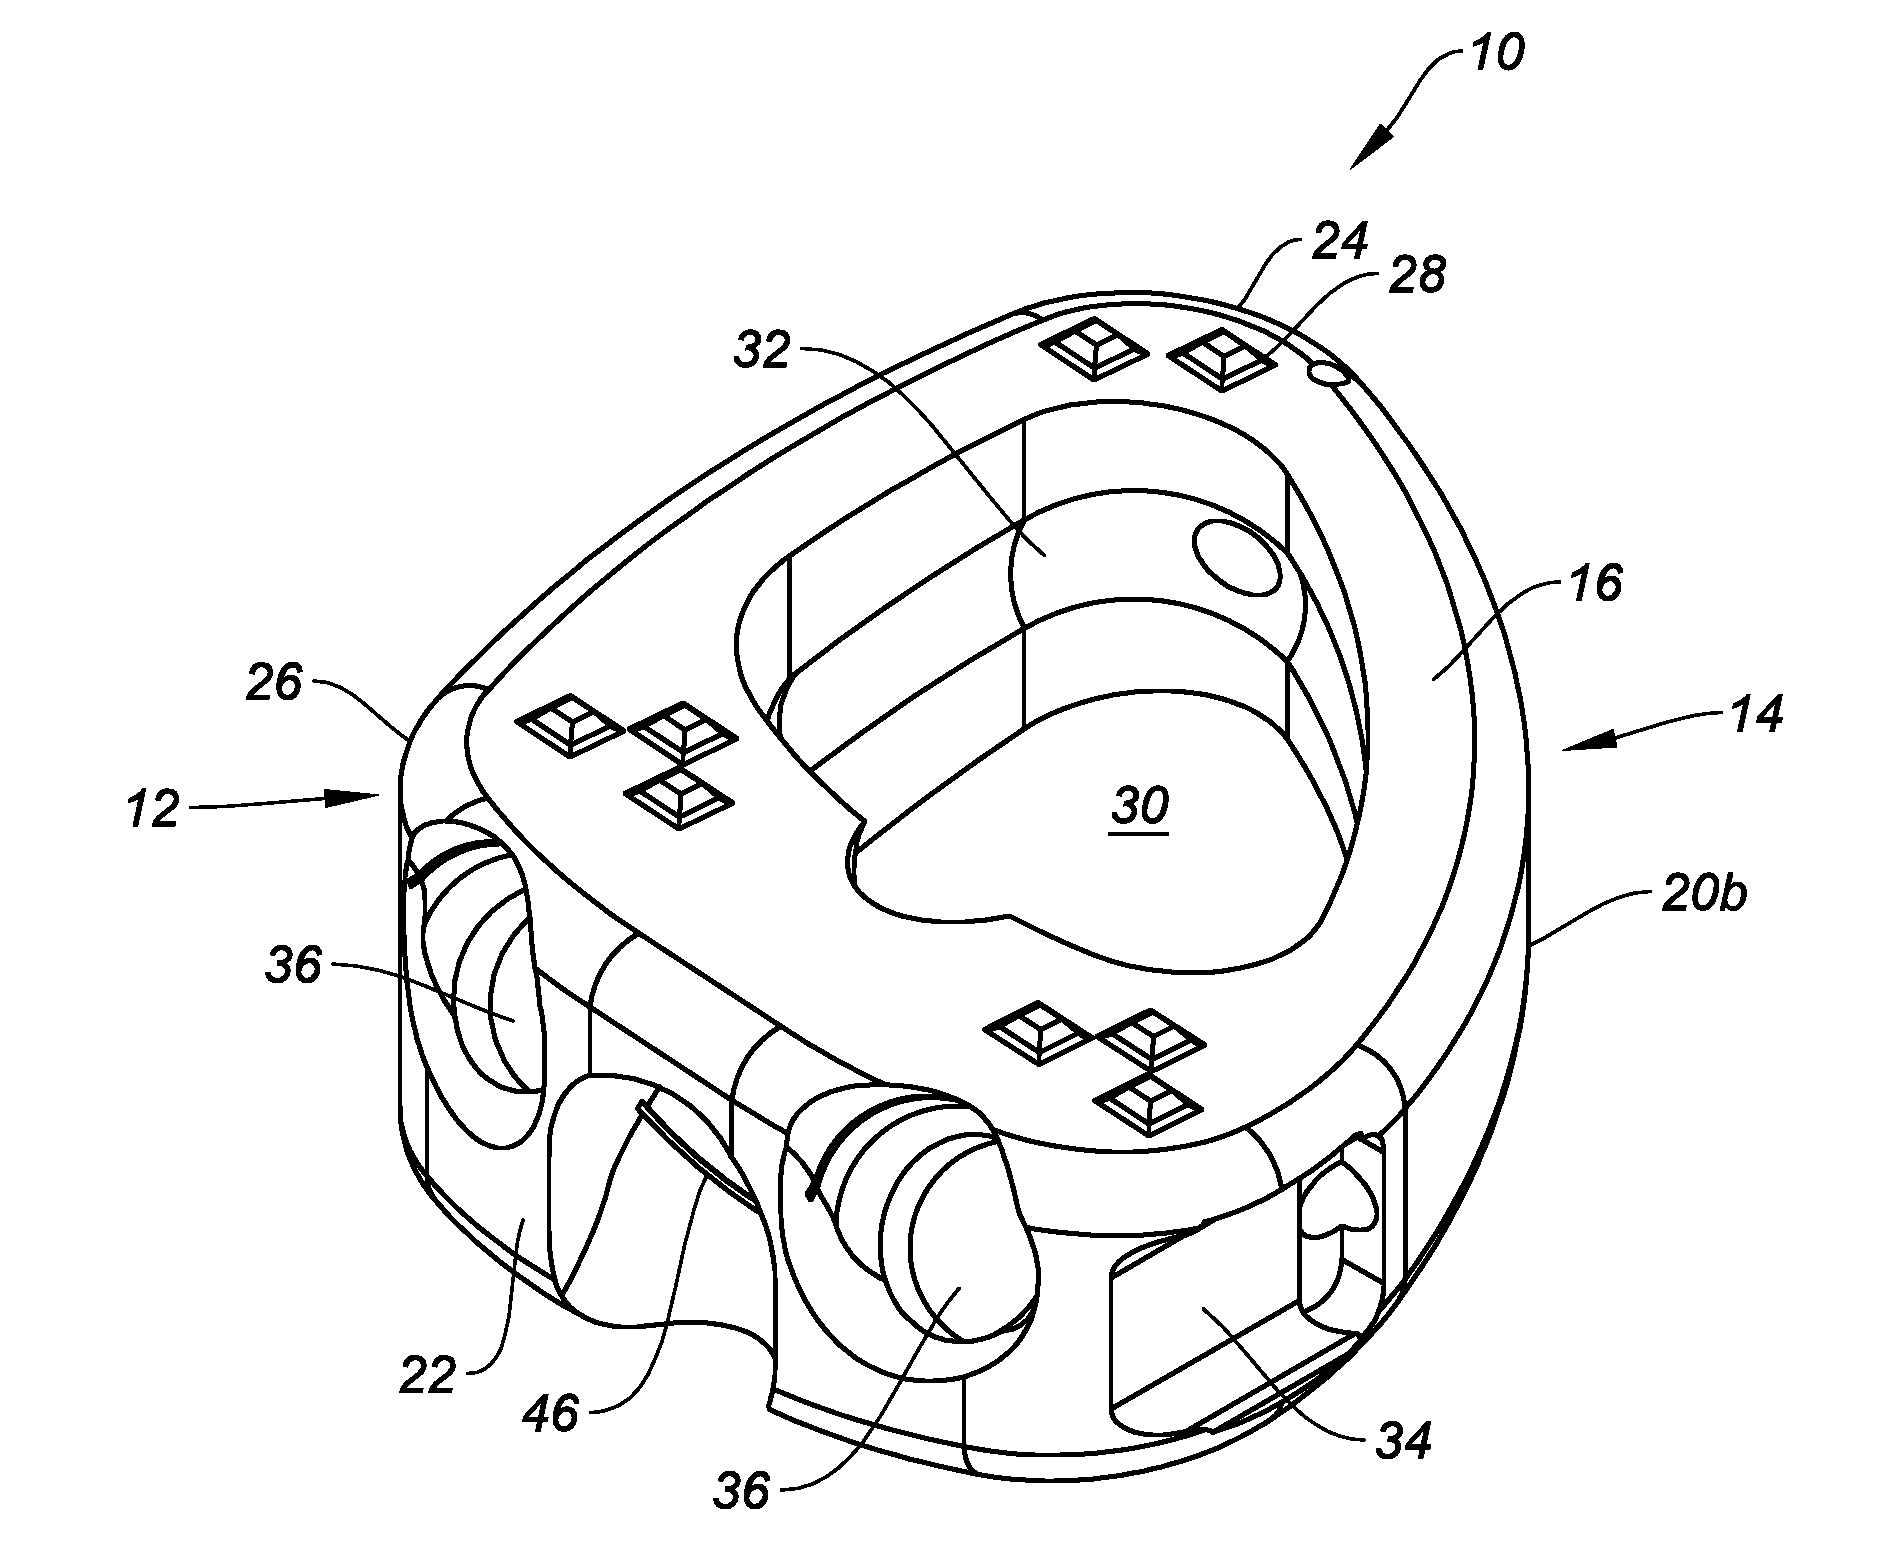 Spinal implants configured for tissue sparing angle of insertion and related methods